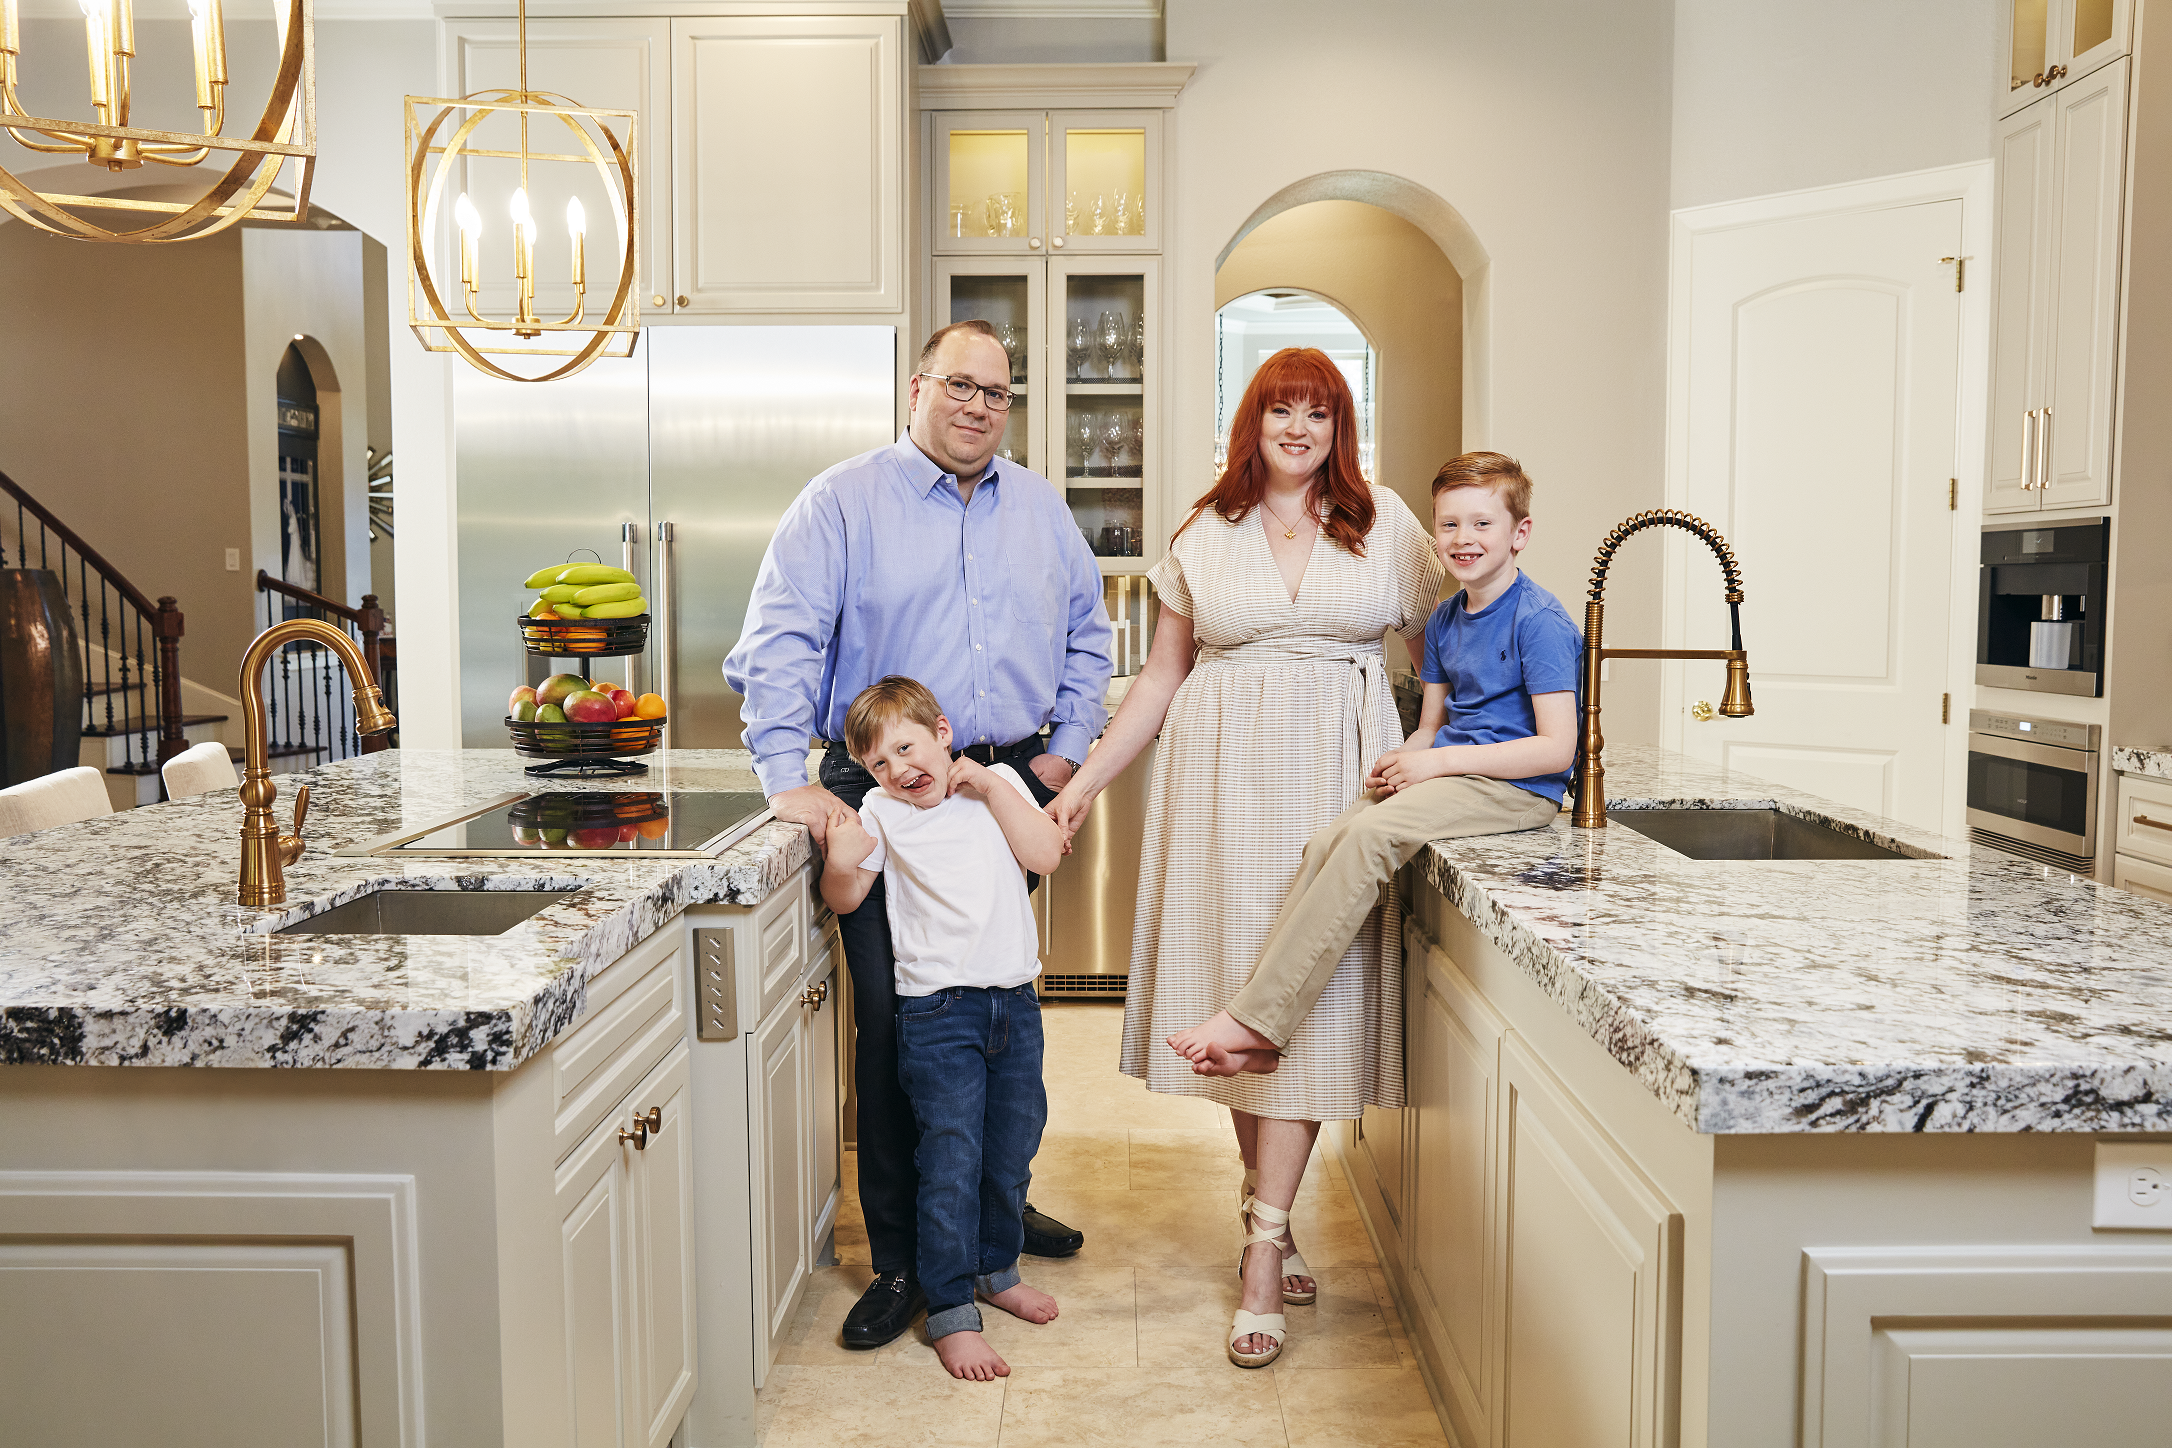 A couple and their two kids posing for a photo standing in-between their kitchen islands.